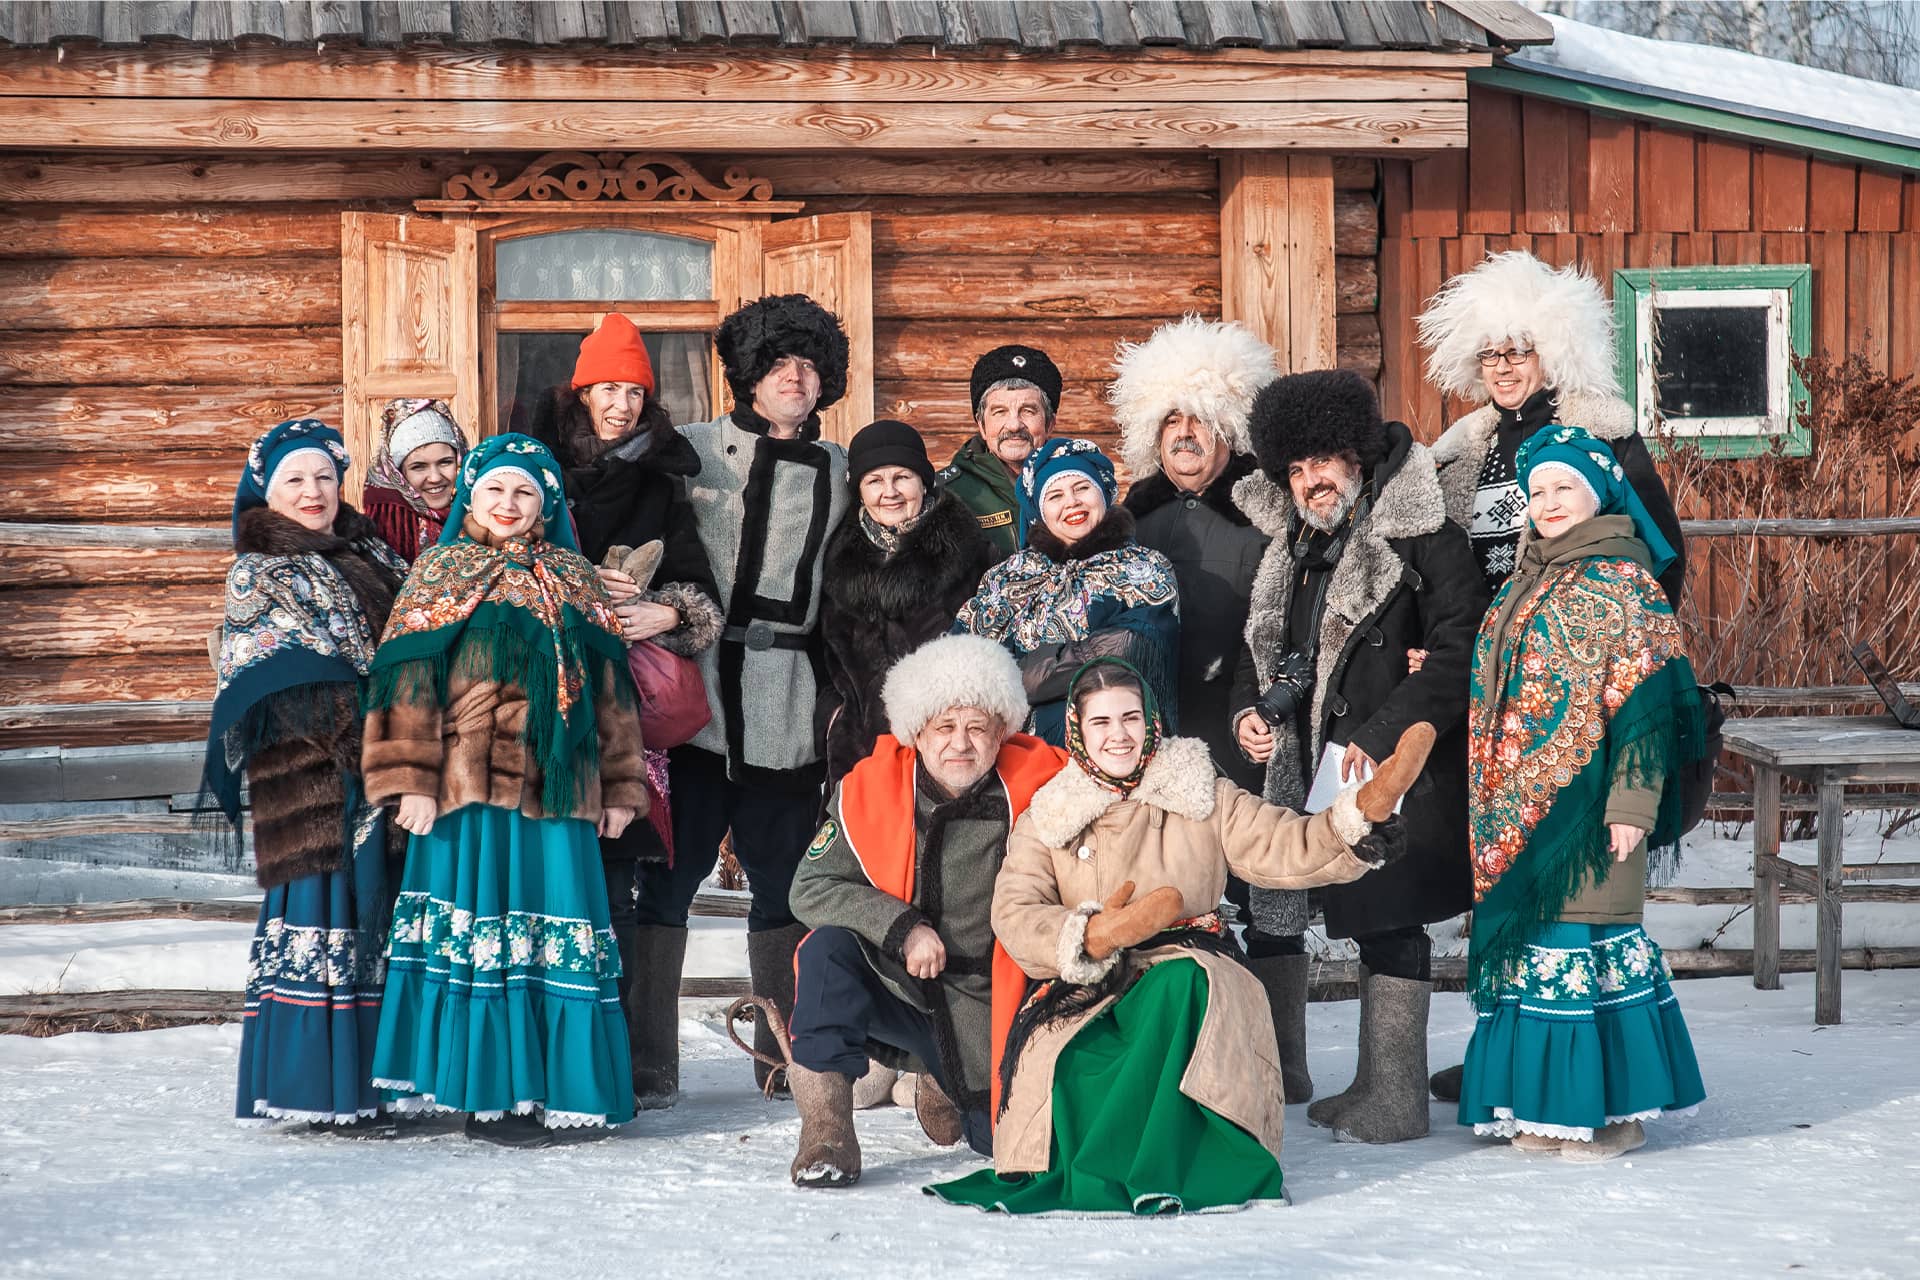 A group of people wearing Russian folk clothes